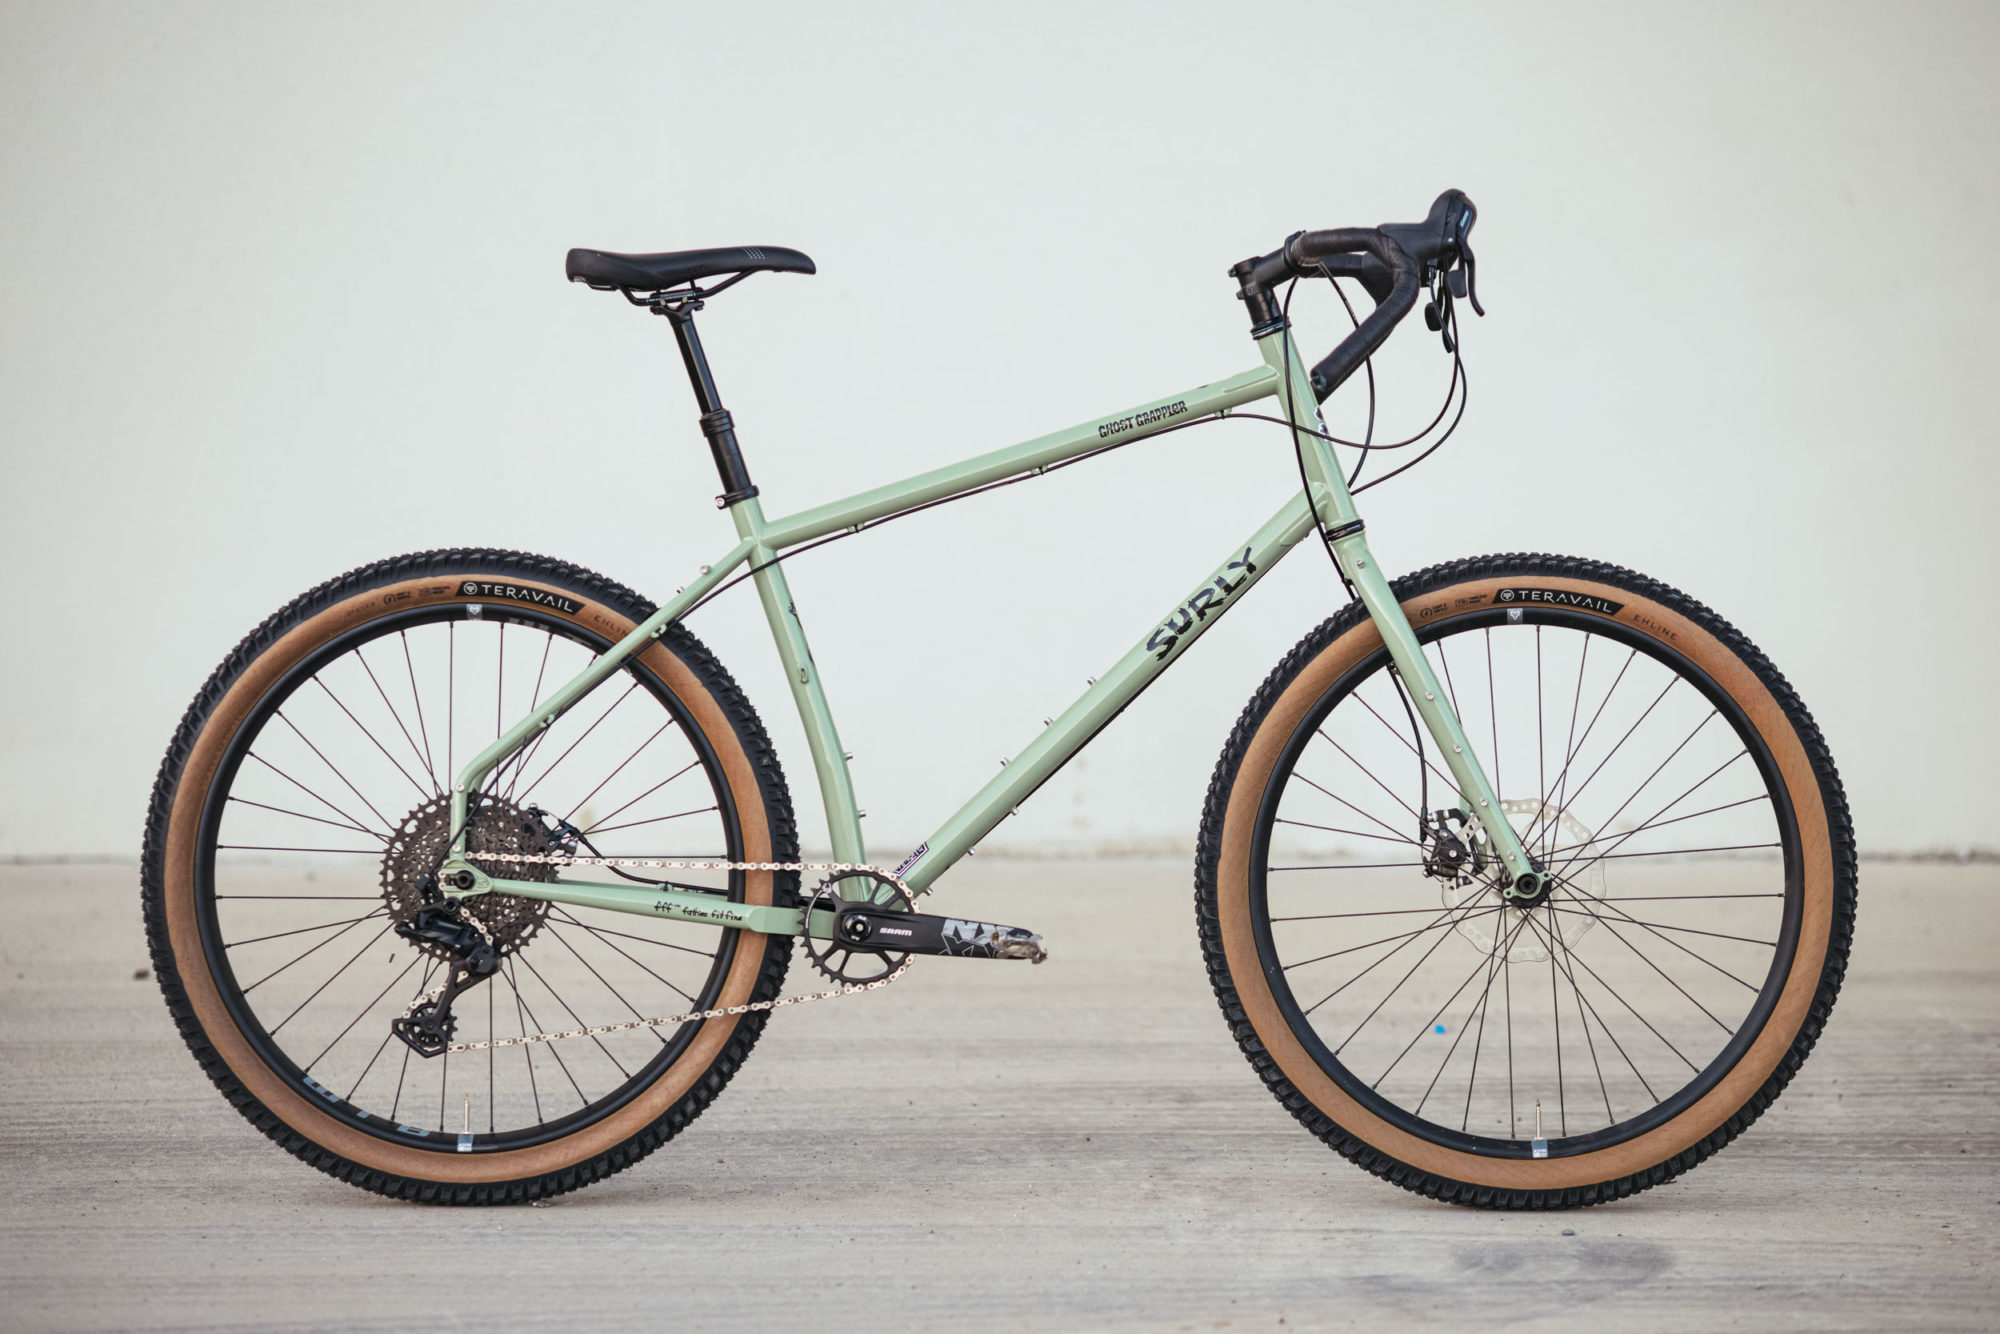 Surly-Ghost-Grappler-Review_19-2000x1334-1.jpg